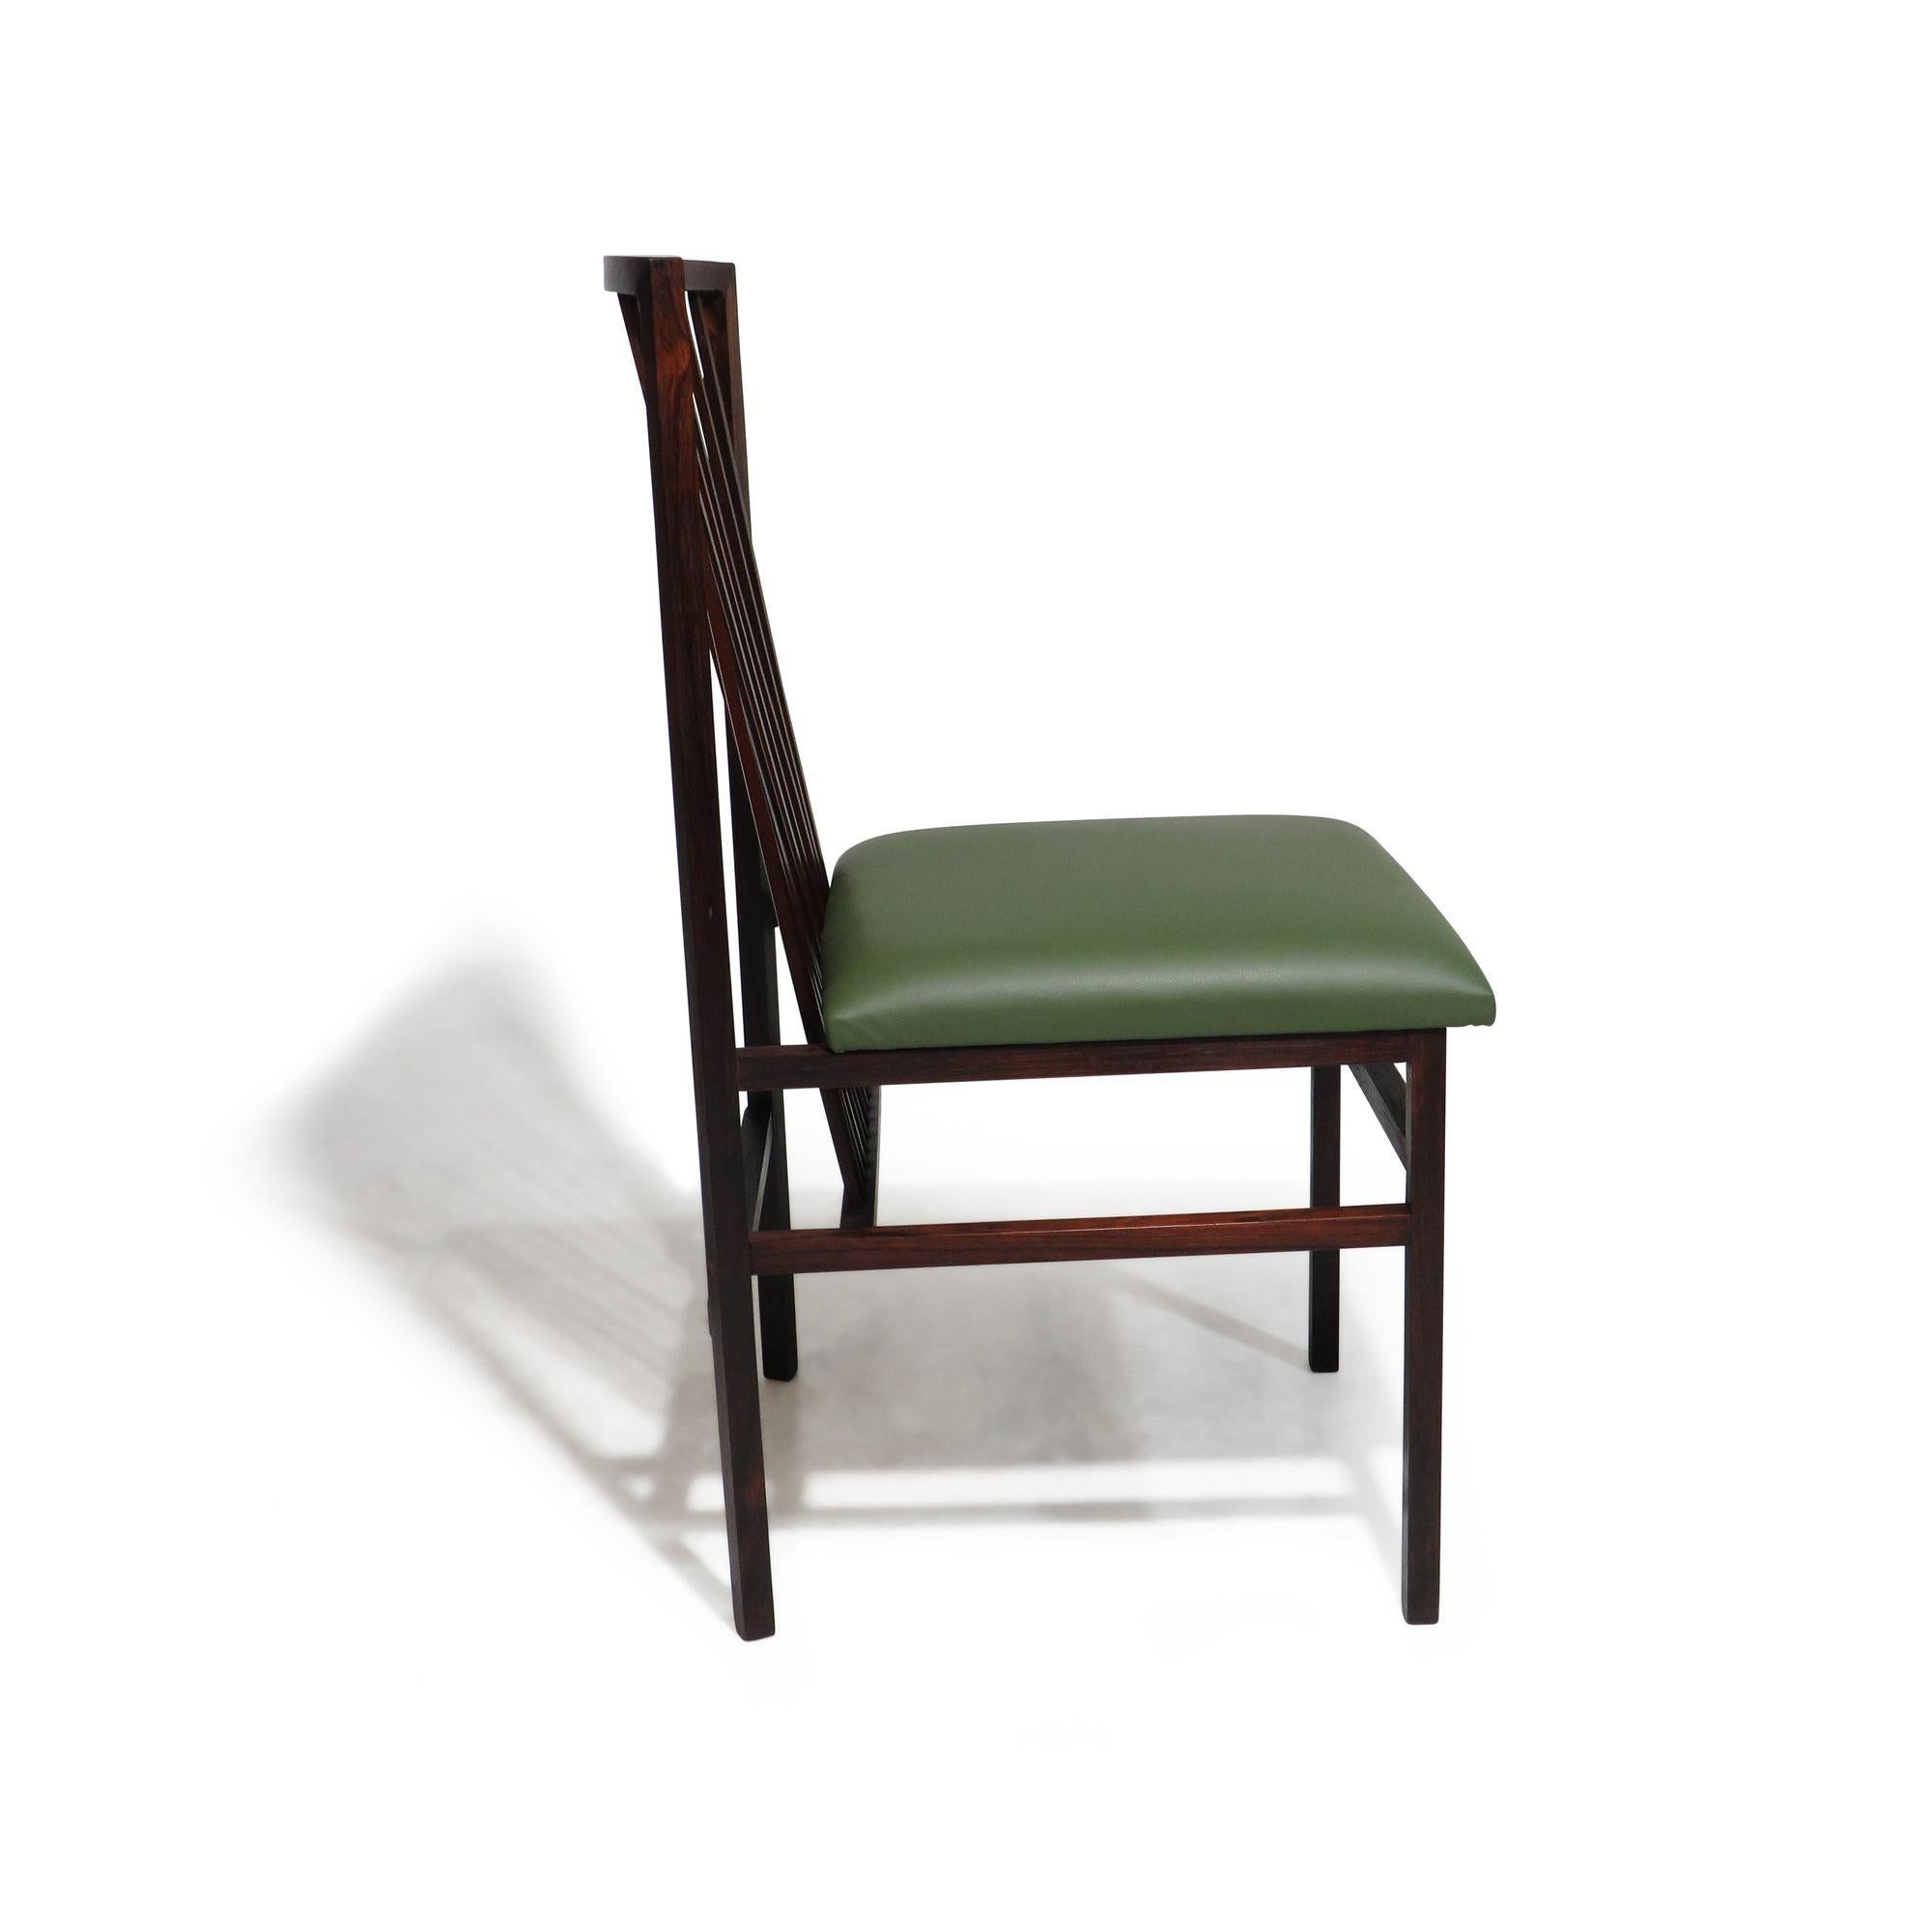 Oiled Eight Estrutural Structural Brazil Modern Chairs For Sale